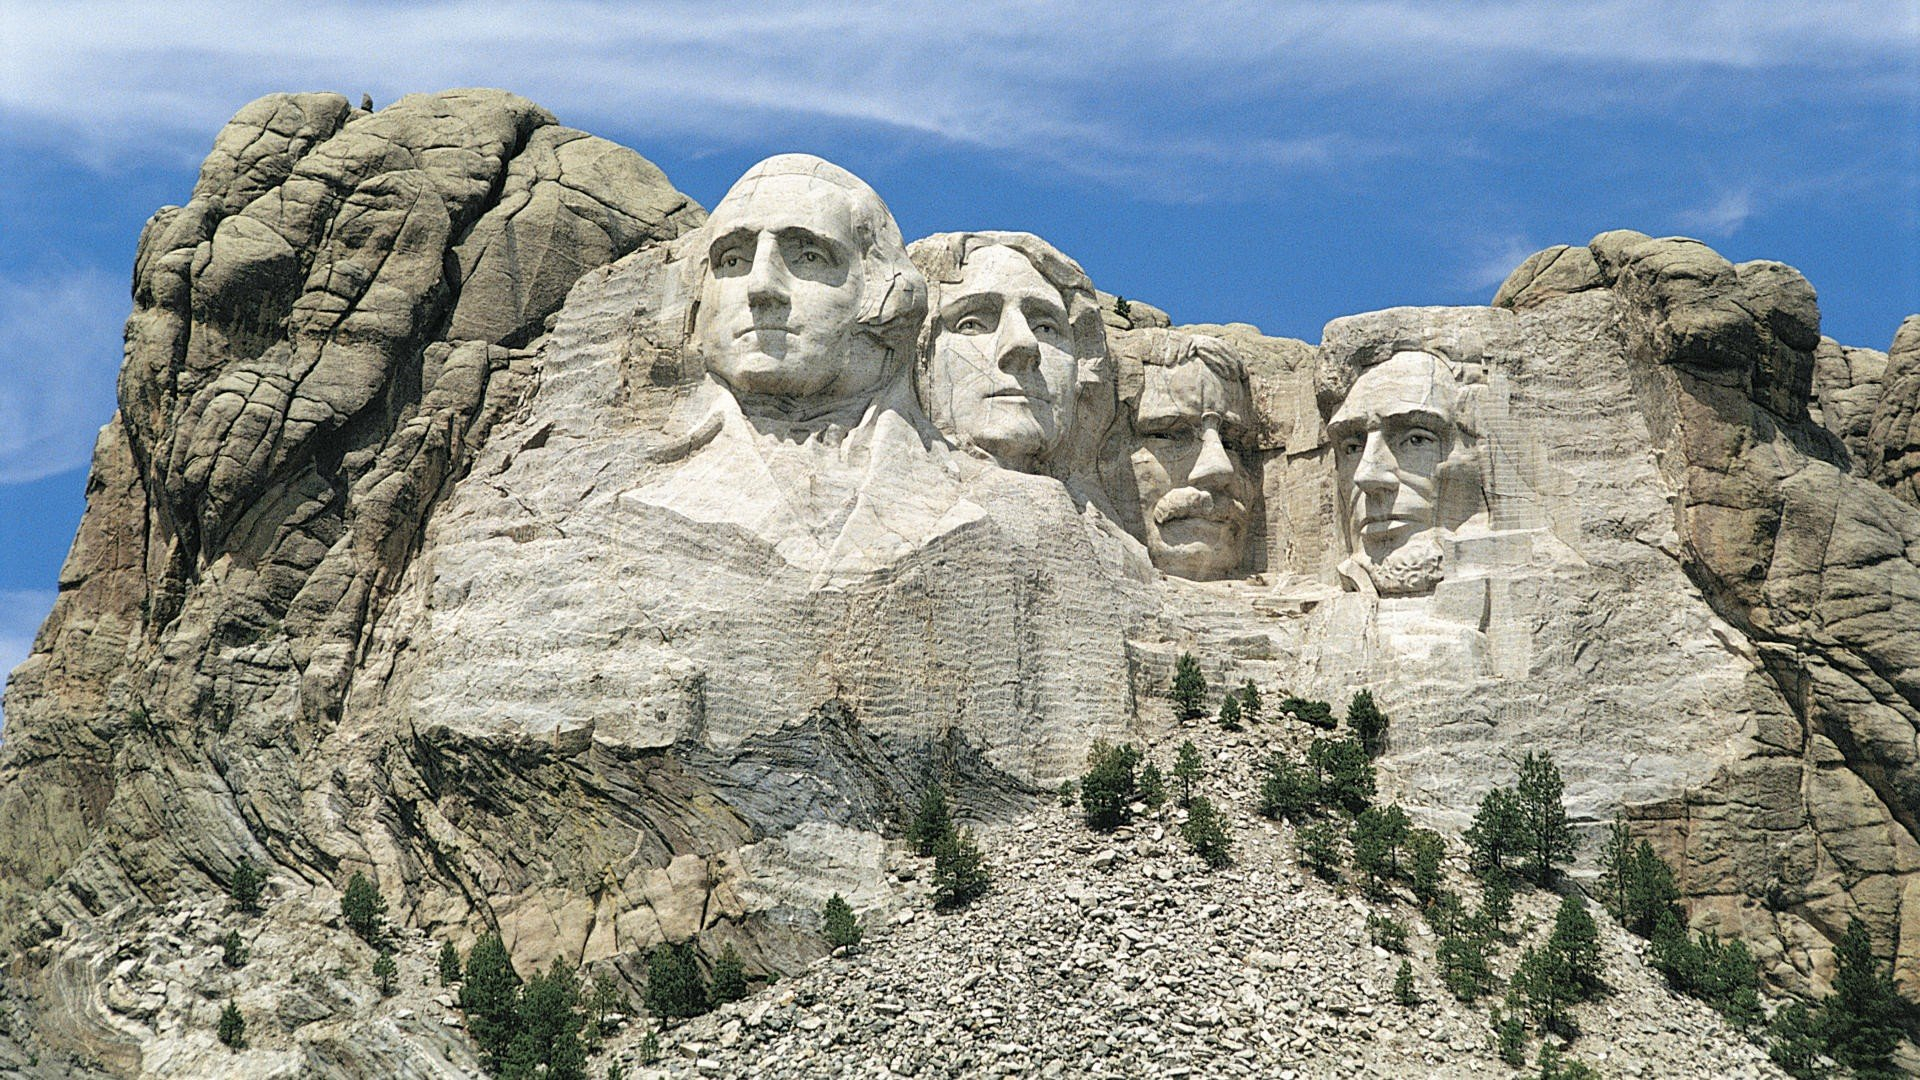 1920x1080 Landscapes nature Abraham Lincoln Mount Rushmore Presidents of the United States George Washington Theodore Roosevelt Thomas Jefferson wallpaper | | 251572